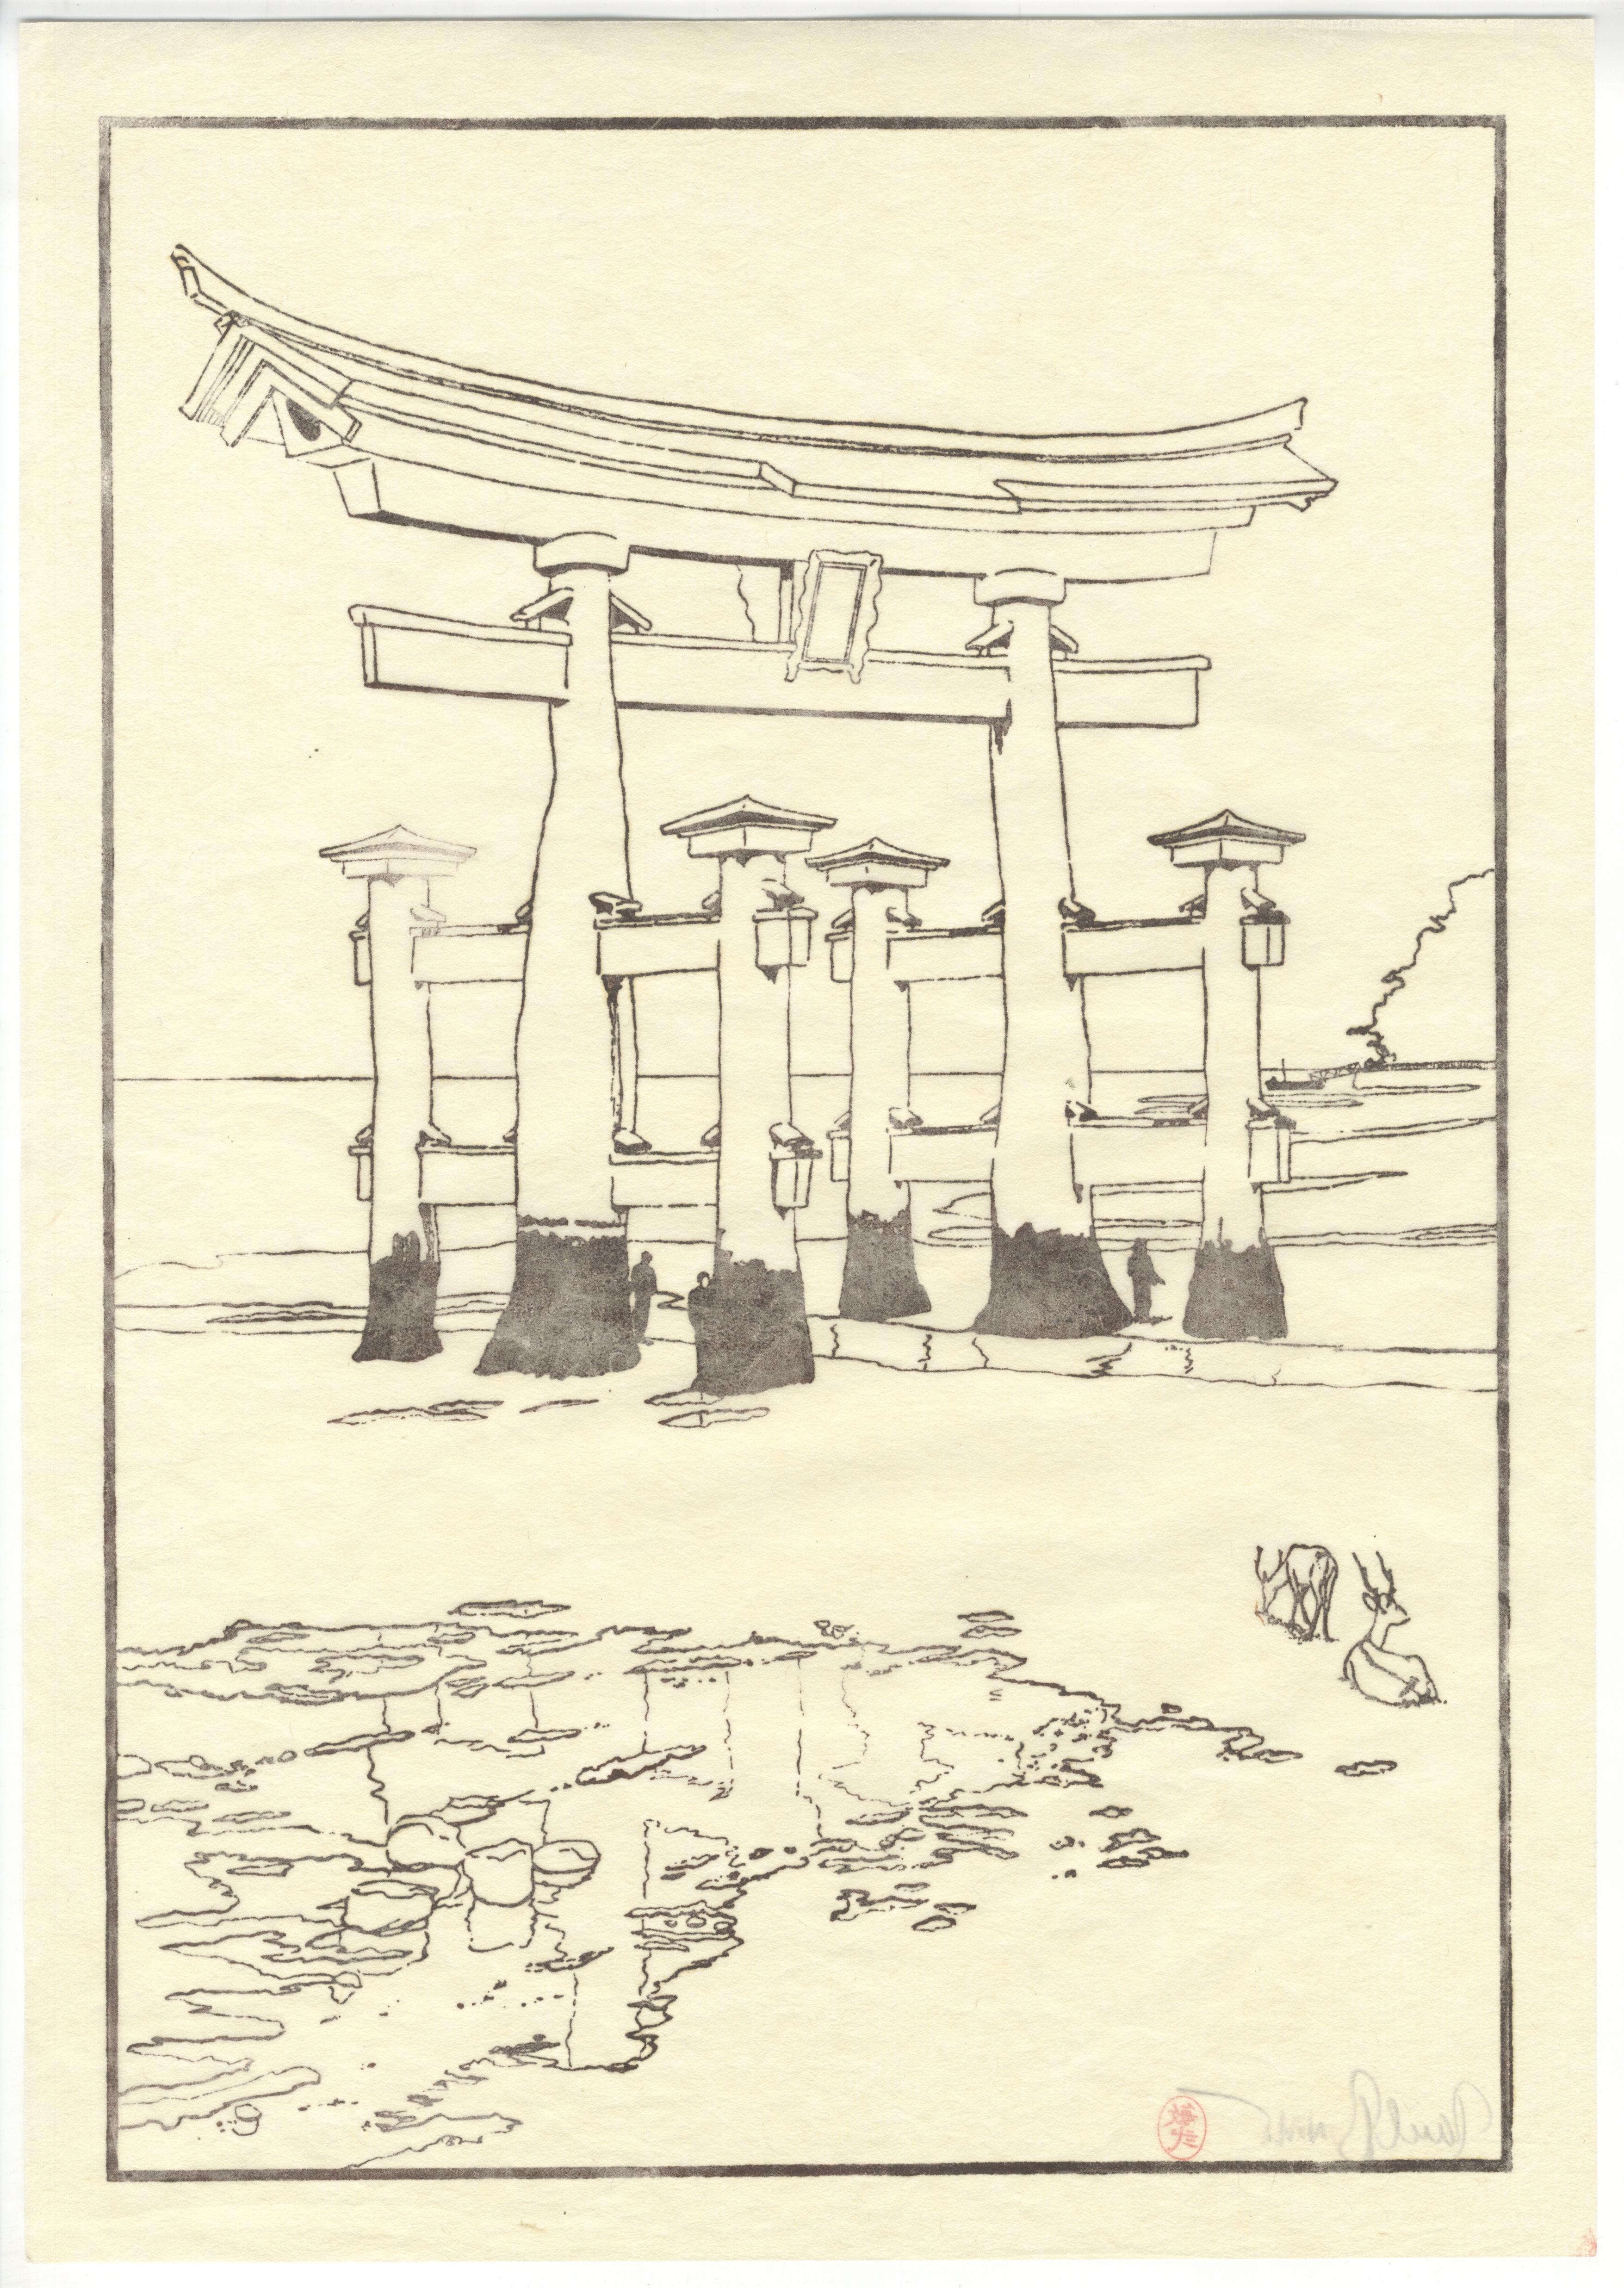 Artist: Paul Binnie (1967 - )
Title: Torii Gate at Miyajima (keyblock print)
Published: by the artist
Date: 2003
Dimensions: 41 x 28.9 cm
Condition report: Very light crease mark on the bottom margin.

This keyblock print is done in the shin-hanga